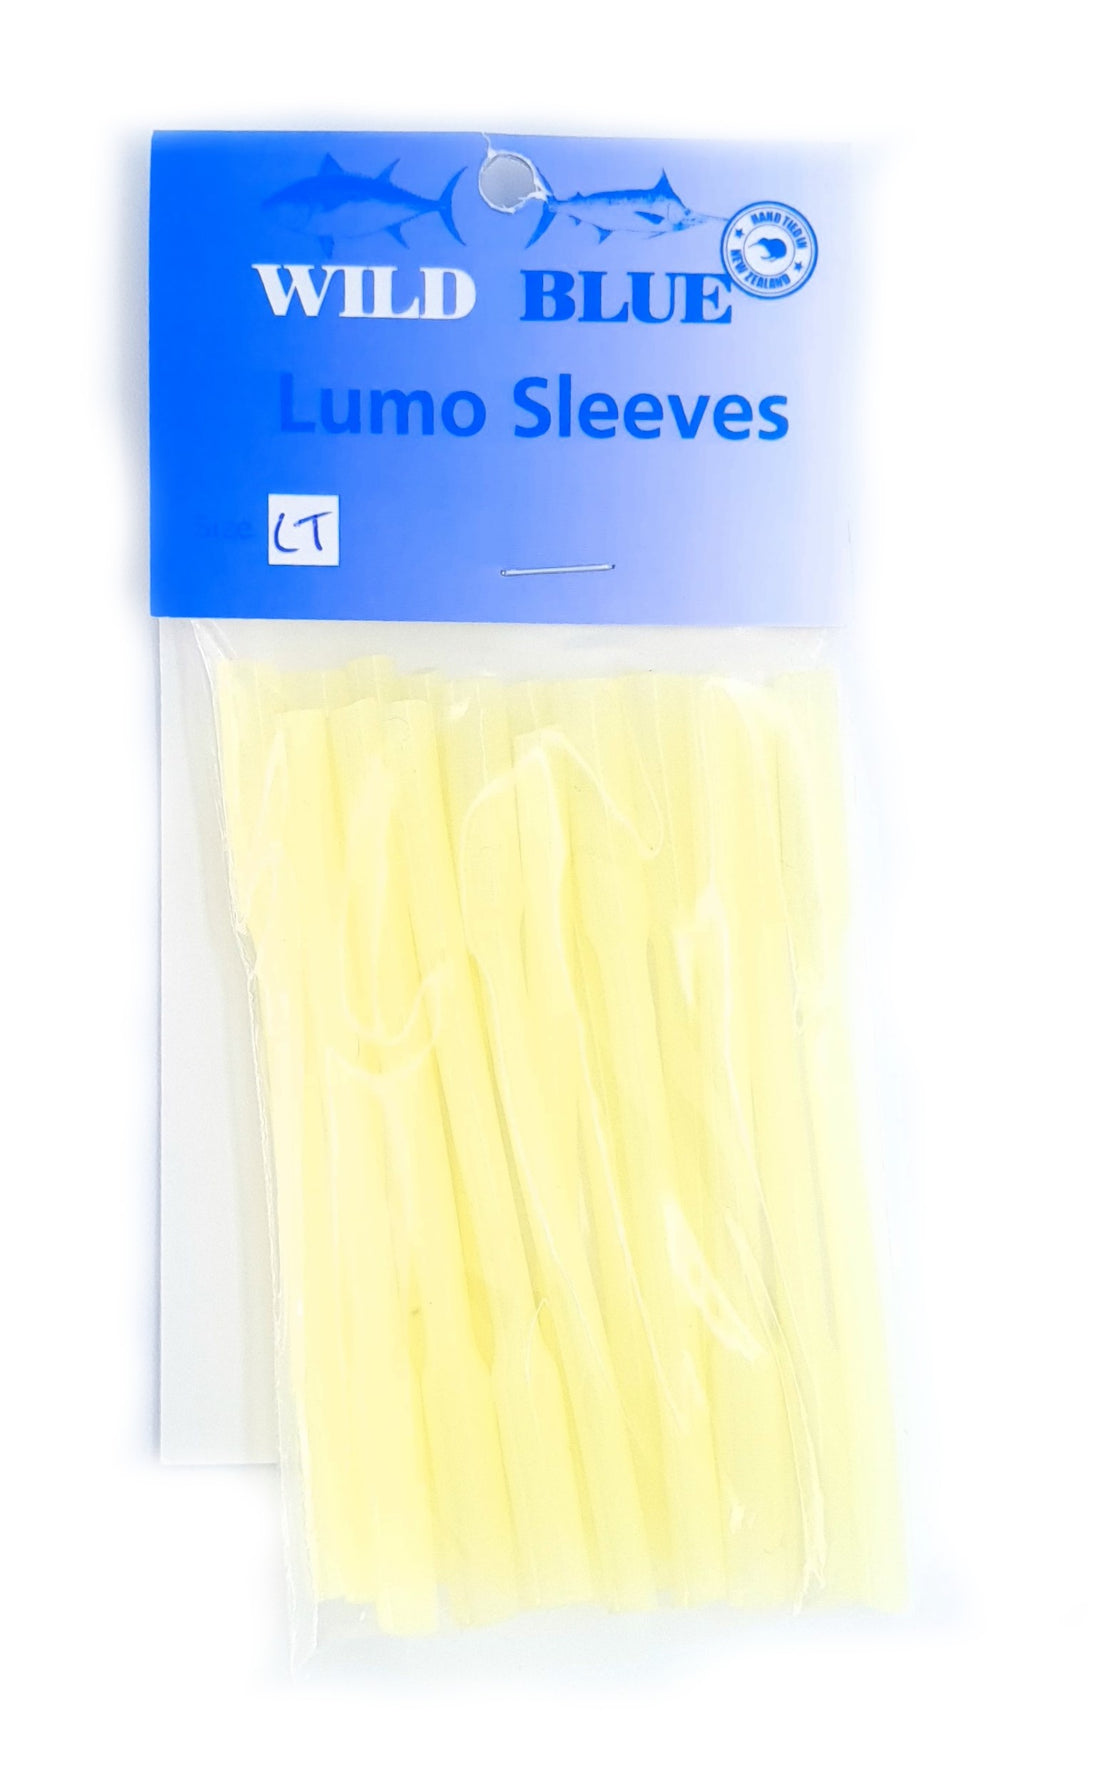 WILD BLUE LUMO SLEEVE GREEN LONG TAIL 15 PACK